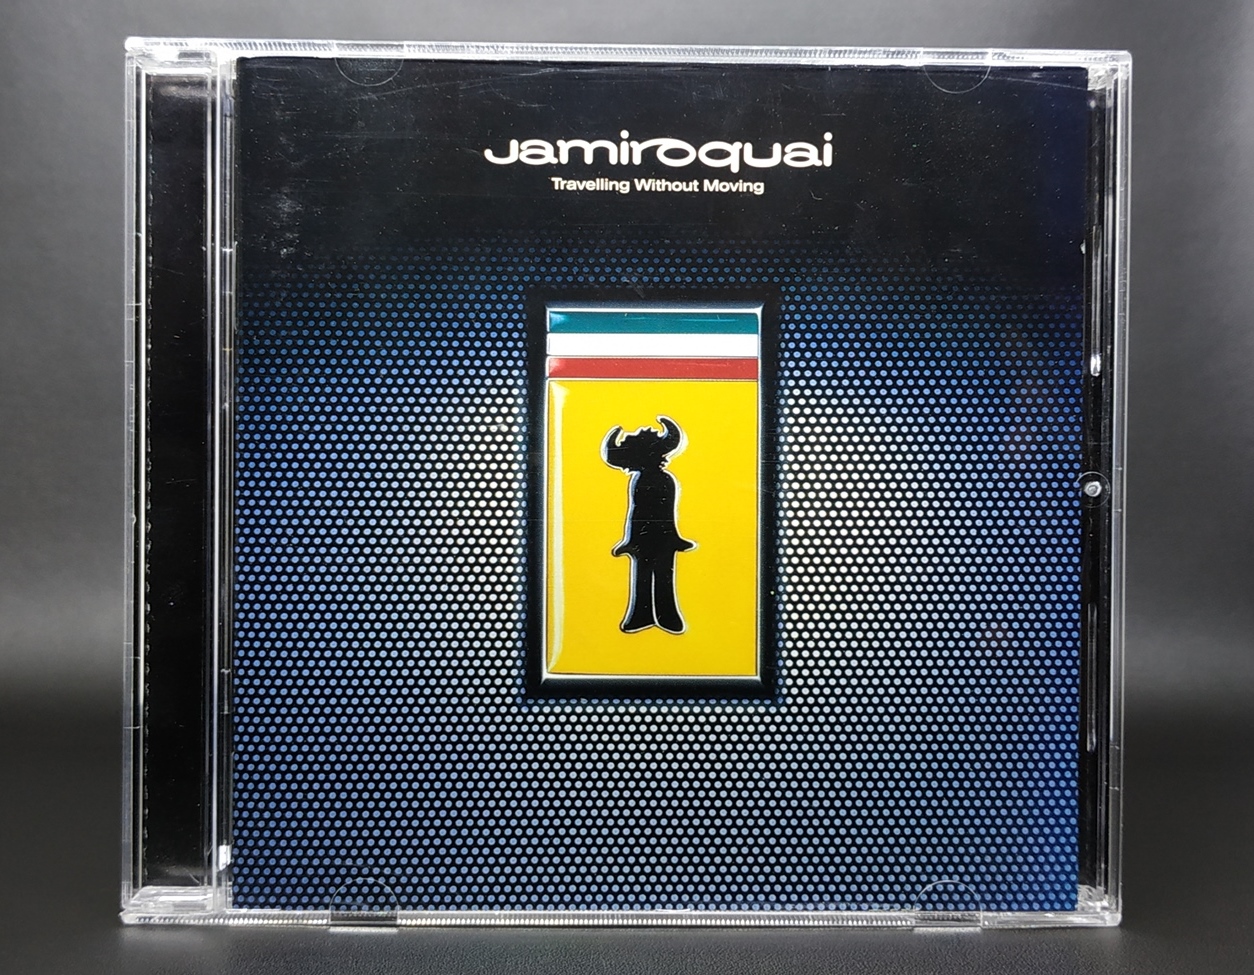 jamiroquai travelling without moving music video